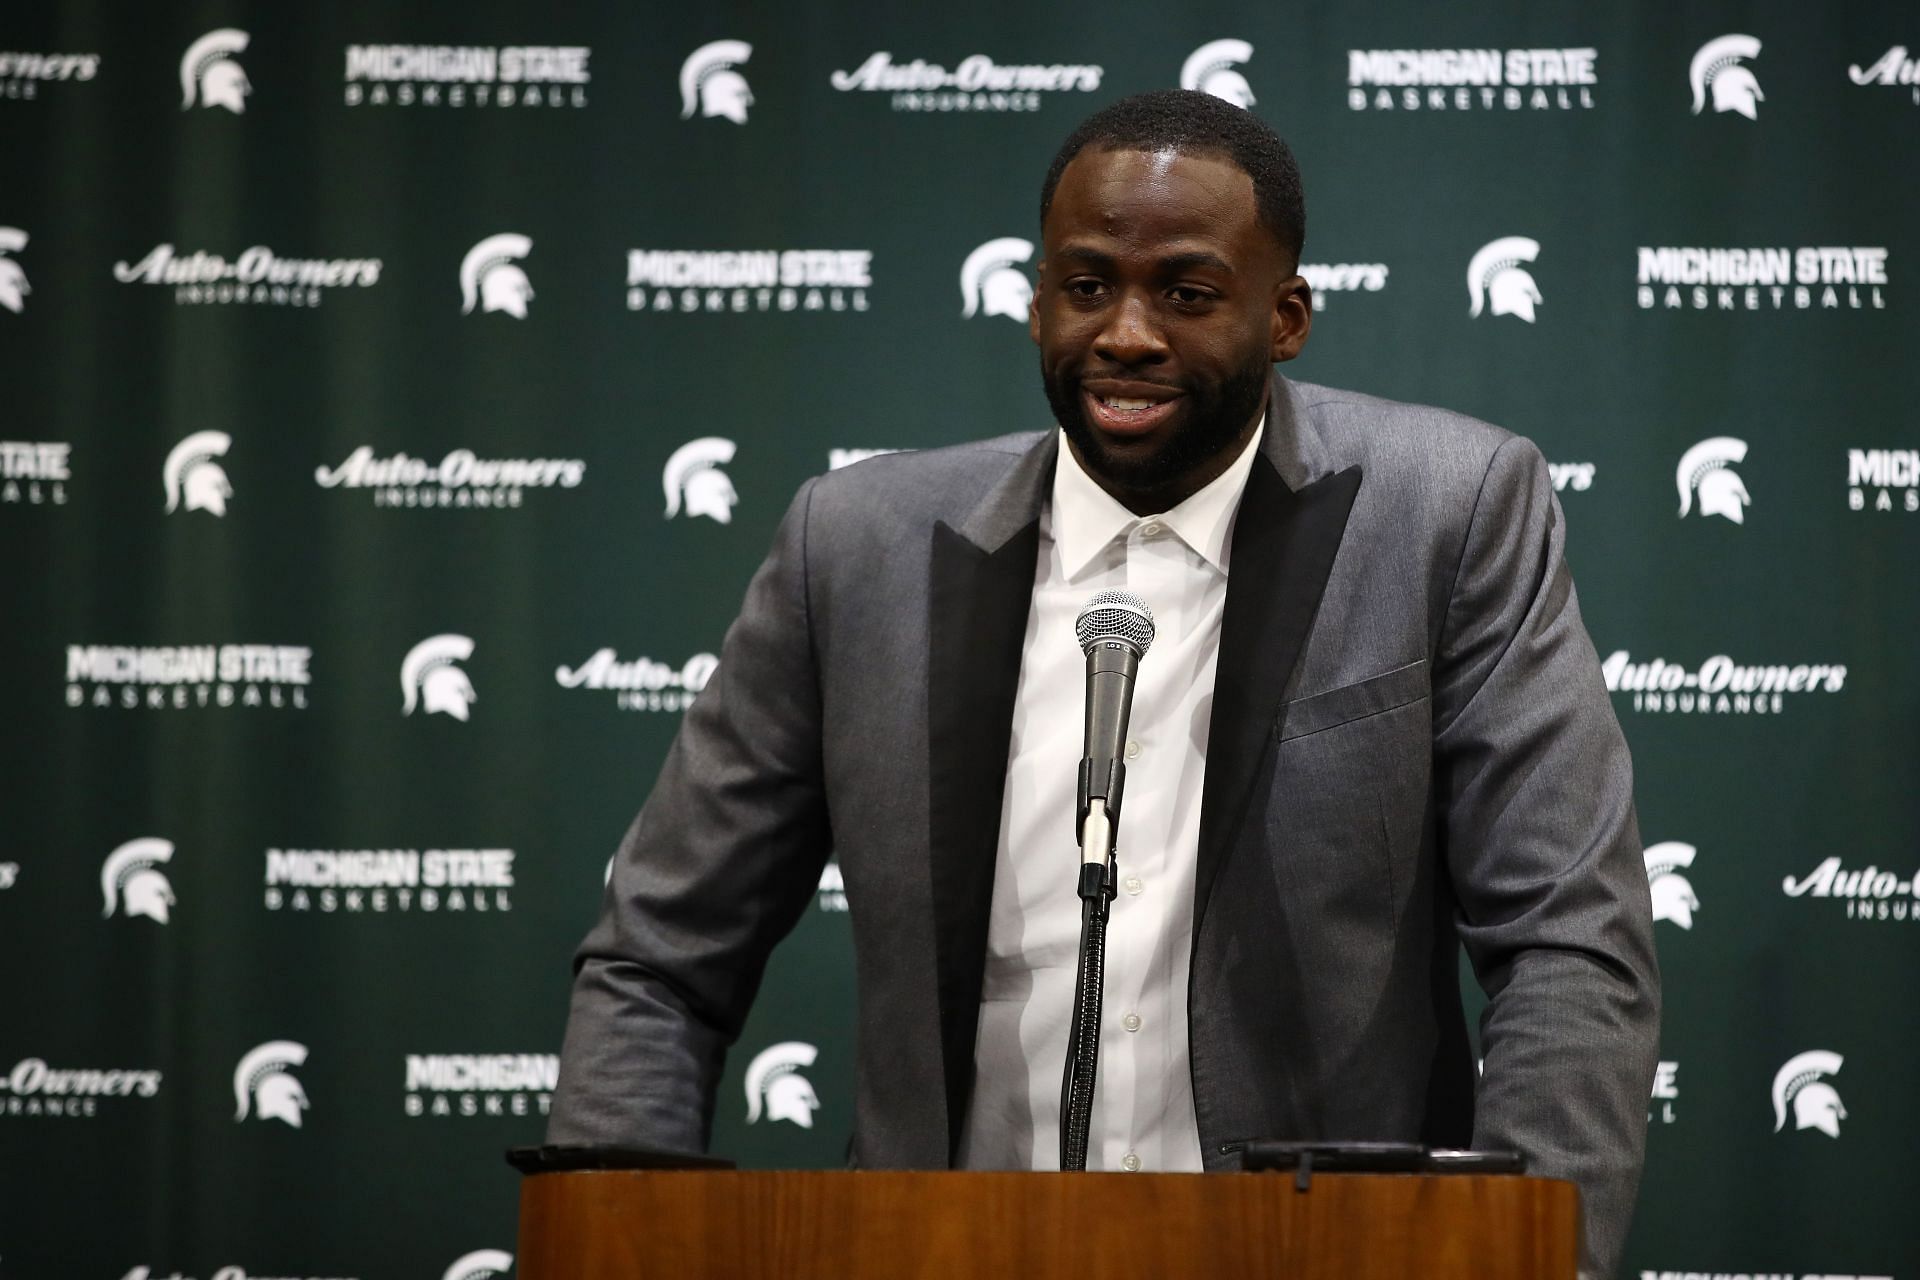 Draymond Green believes his Michigan State Spartans will eliminate Duke from the NCAA tournament.